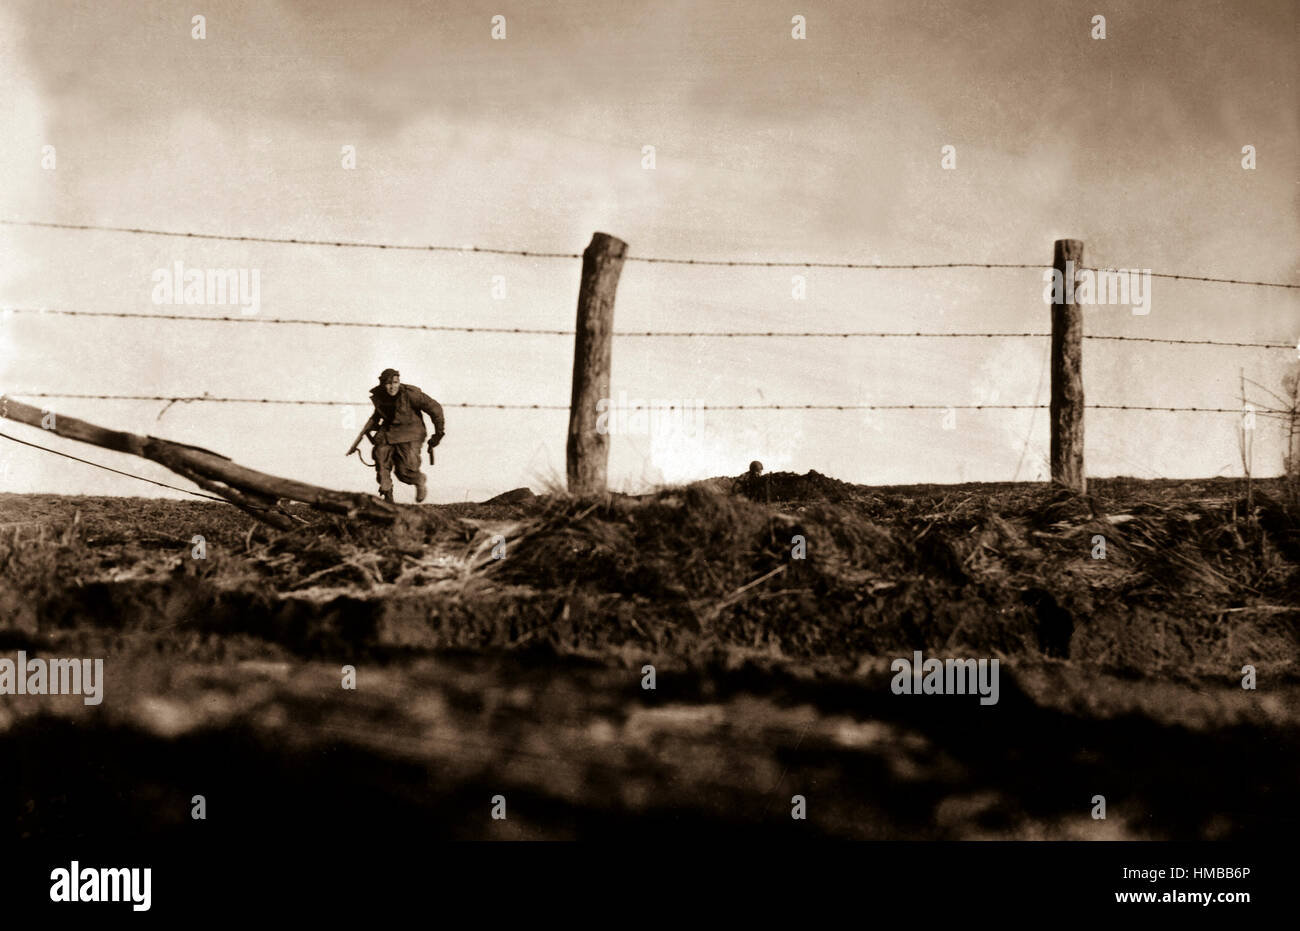 Infantryman goes out on a one-man sortie, covered by a buddy in the background.  82nd Airborne Division, Bra, Belgium. December 24, 1944. Edgren. (Army) NARA FILE #:  111-SC-197861 WAR & CONFLICT BOOK #:  1073 Stock Photo